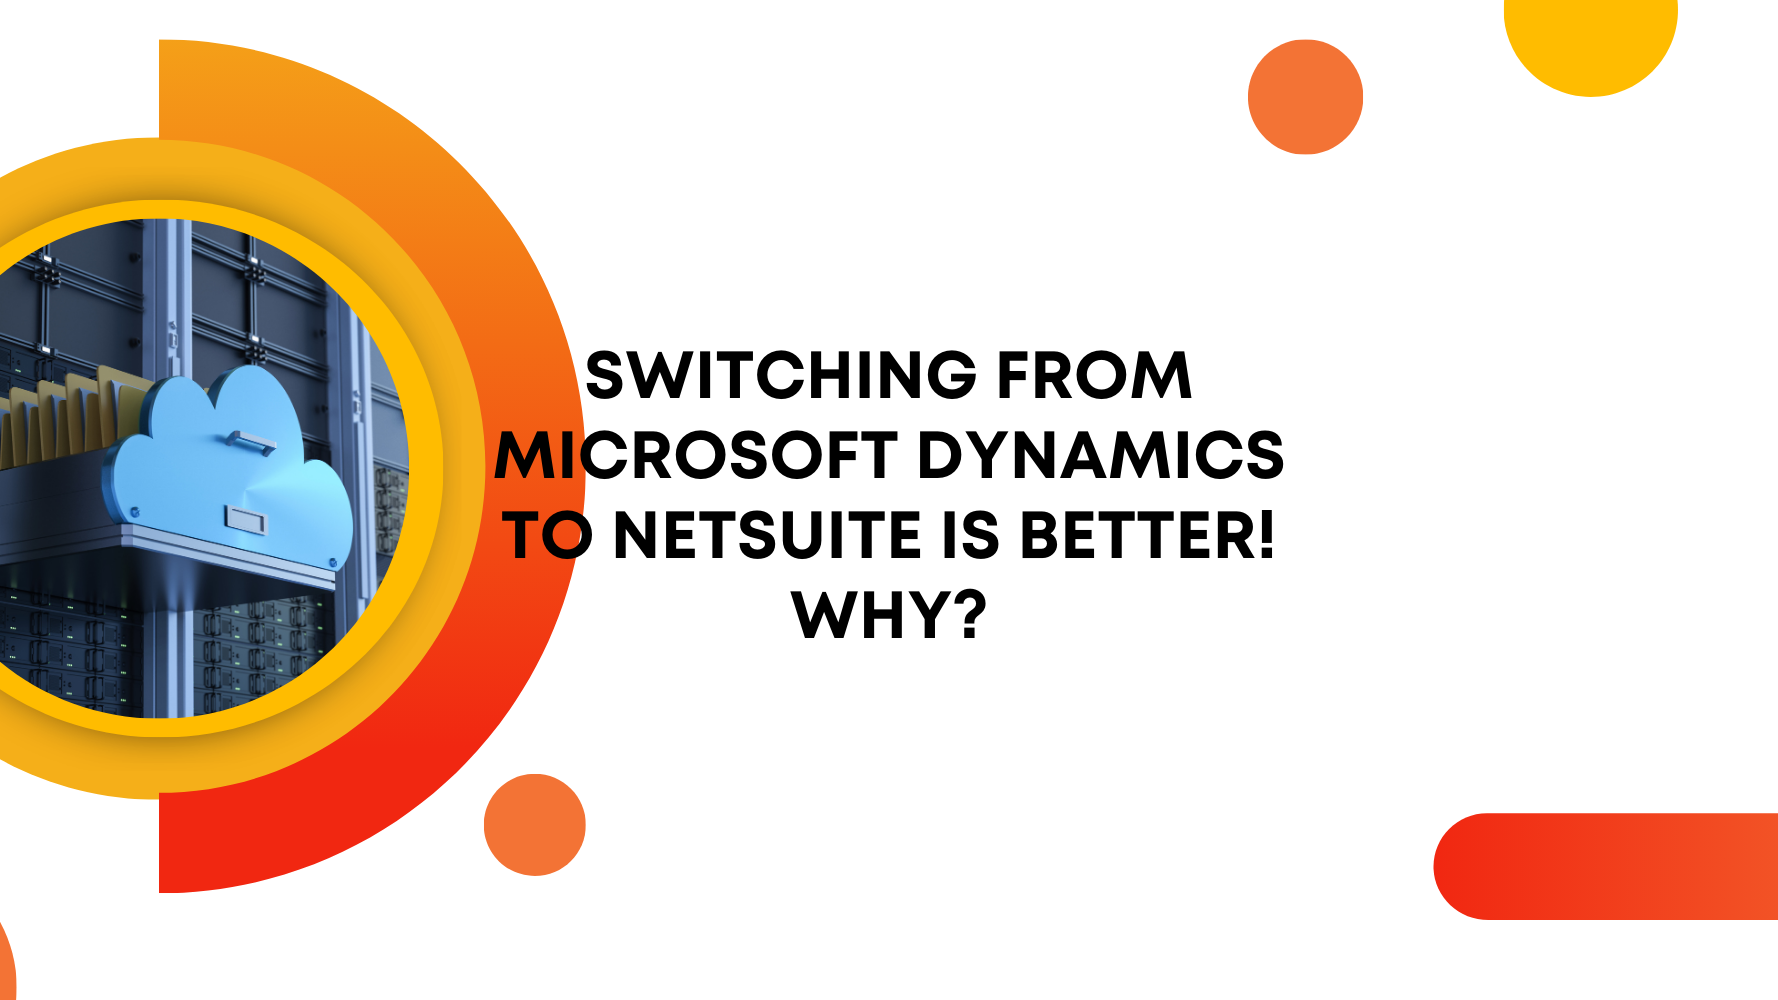 Switching from Microsoft Dynamics to NetSuite is Better!